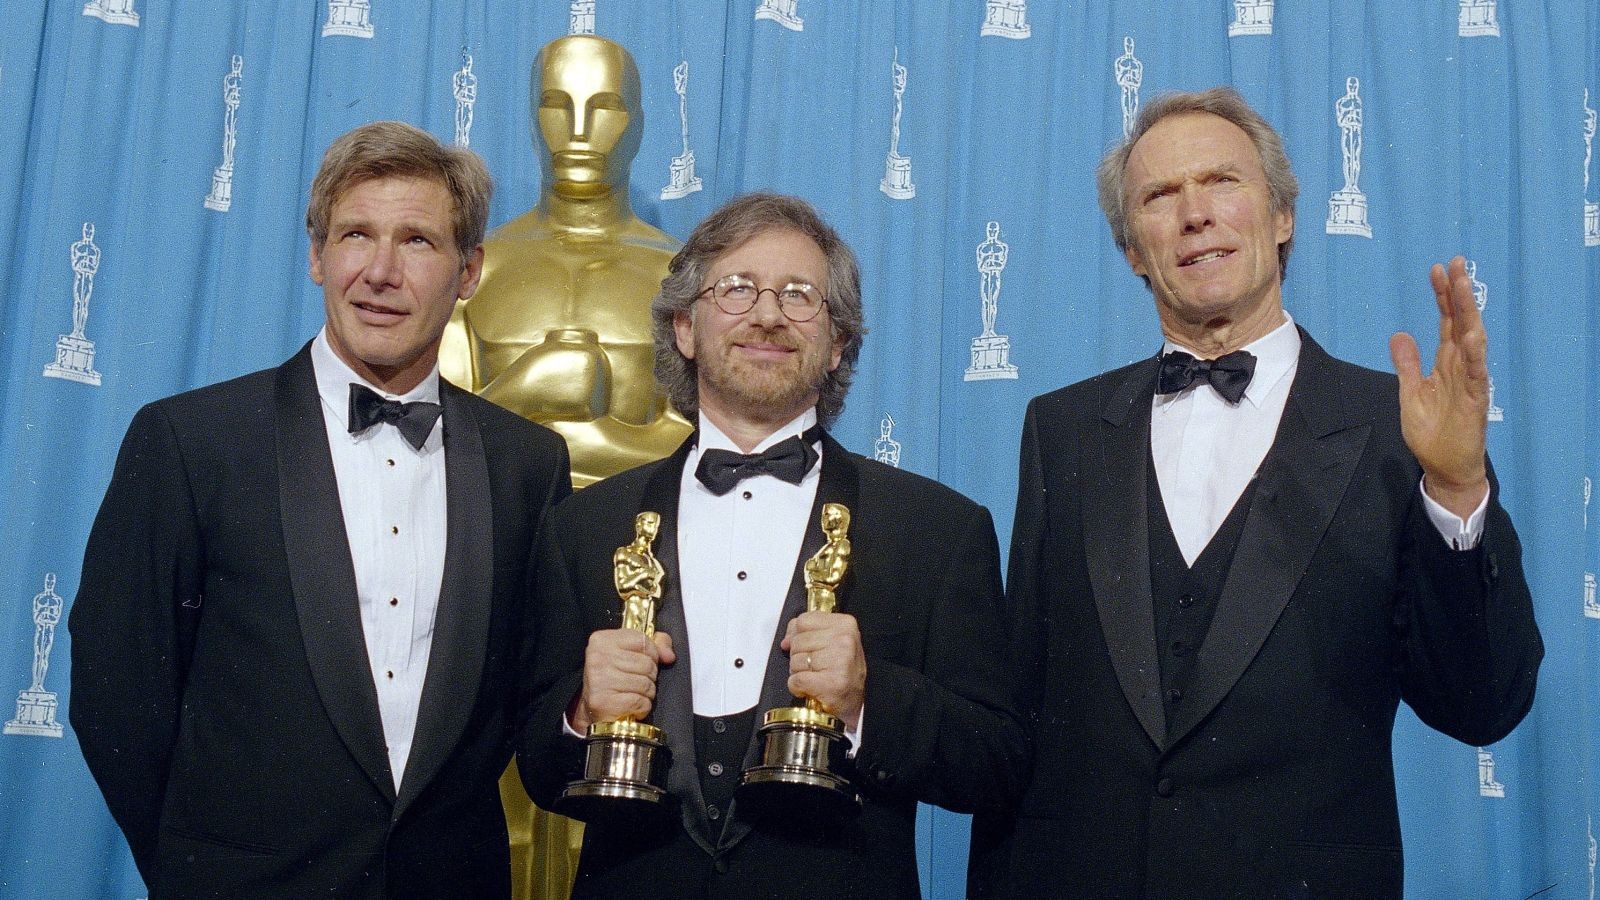 Clint Eastwood, Harrison Ford and Steven Spielberg